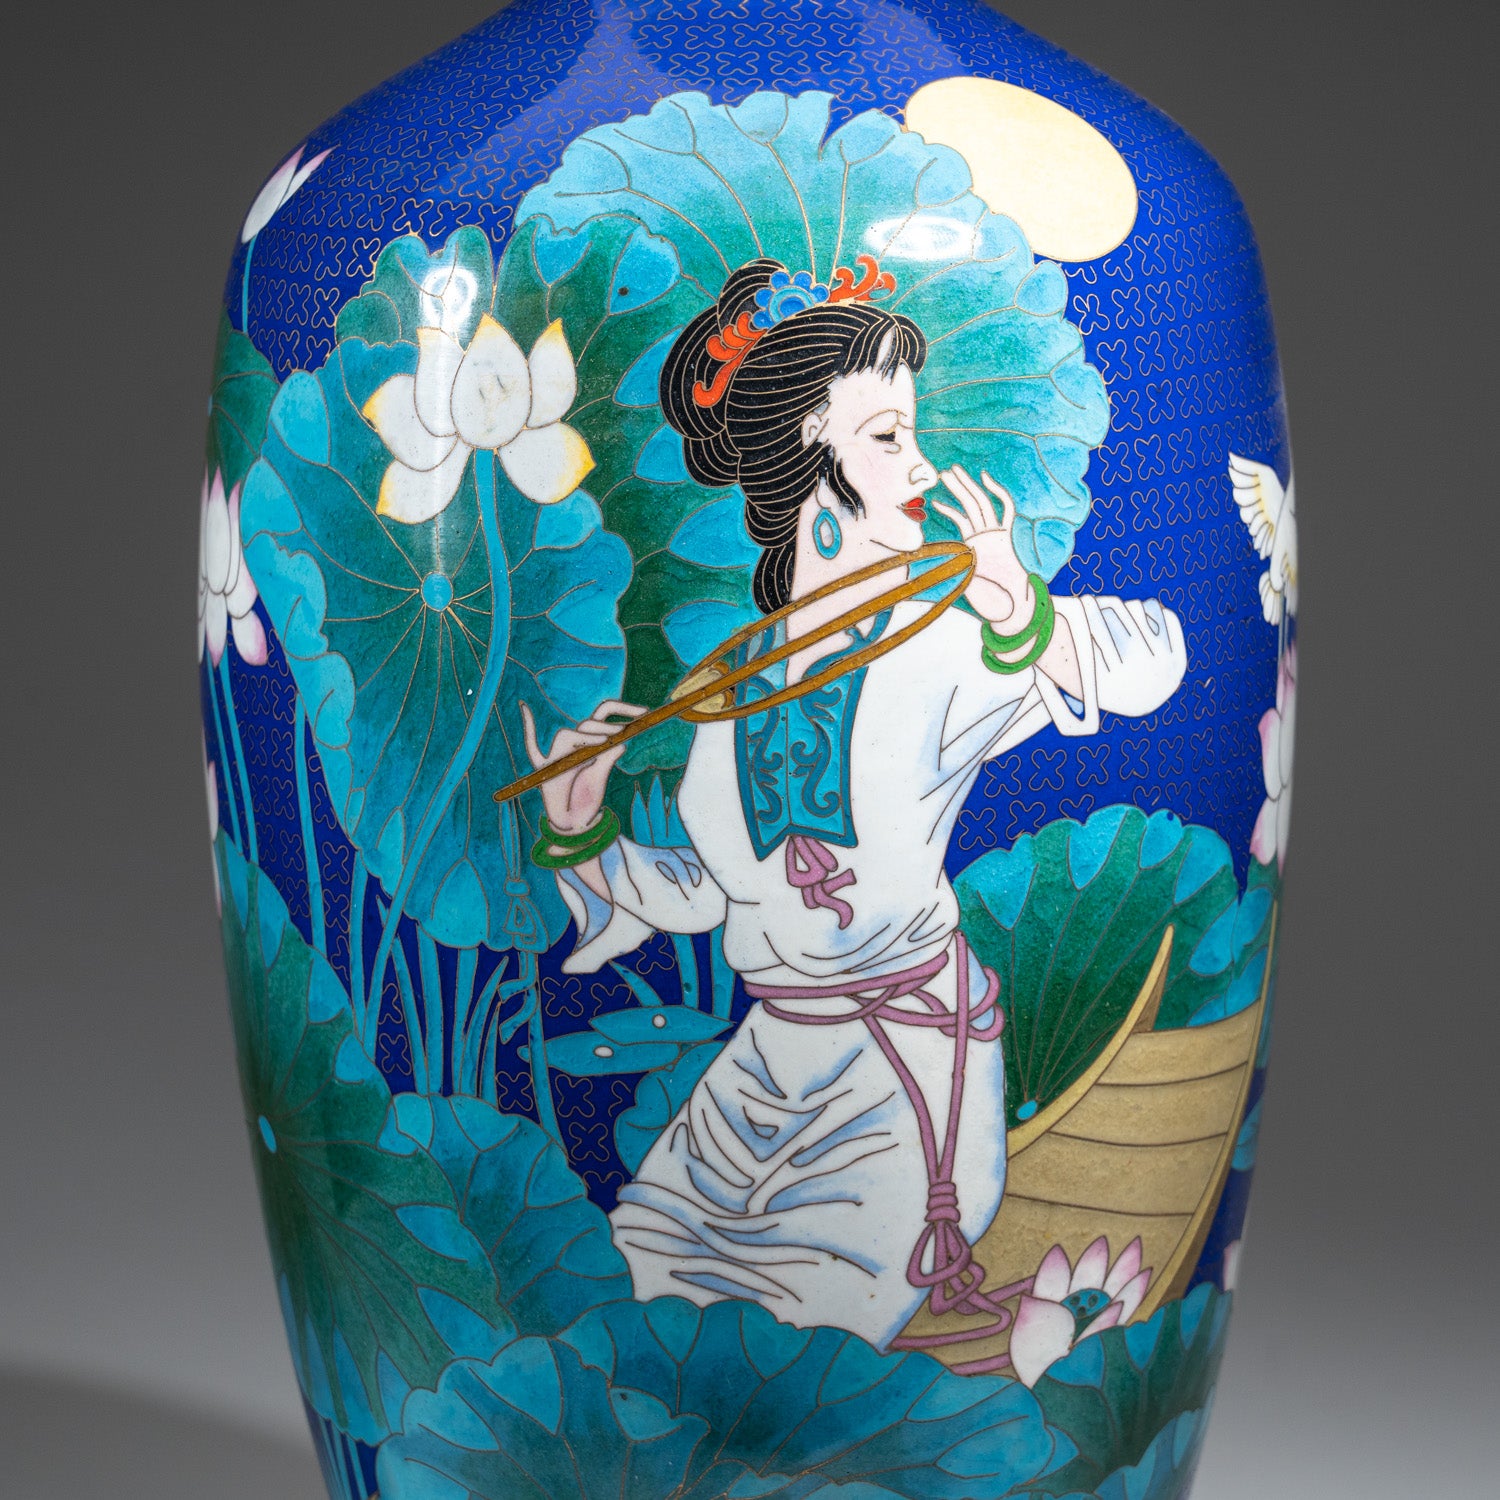 Genuine Cloisonne Vase with Custom Wooden Stand